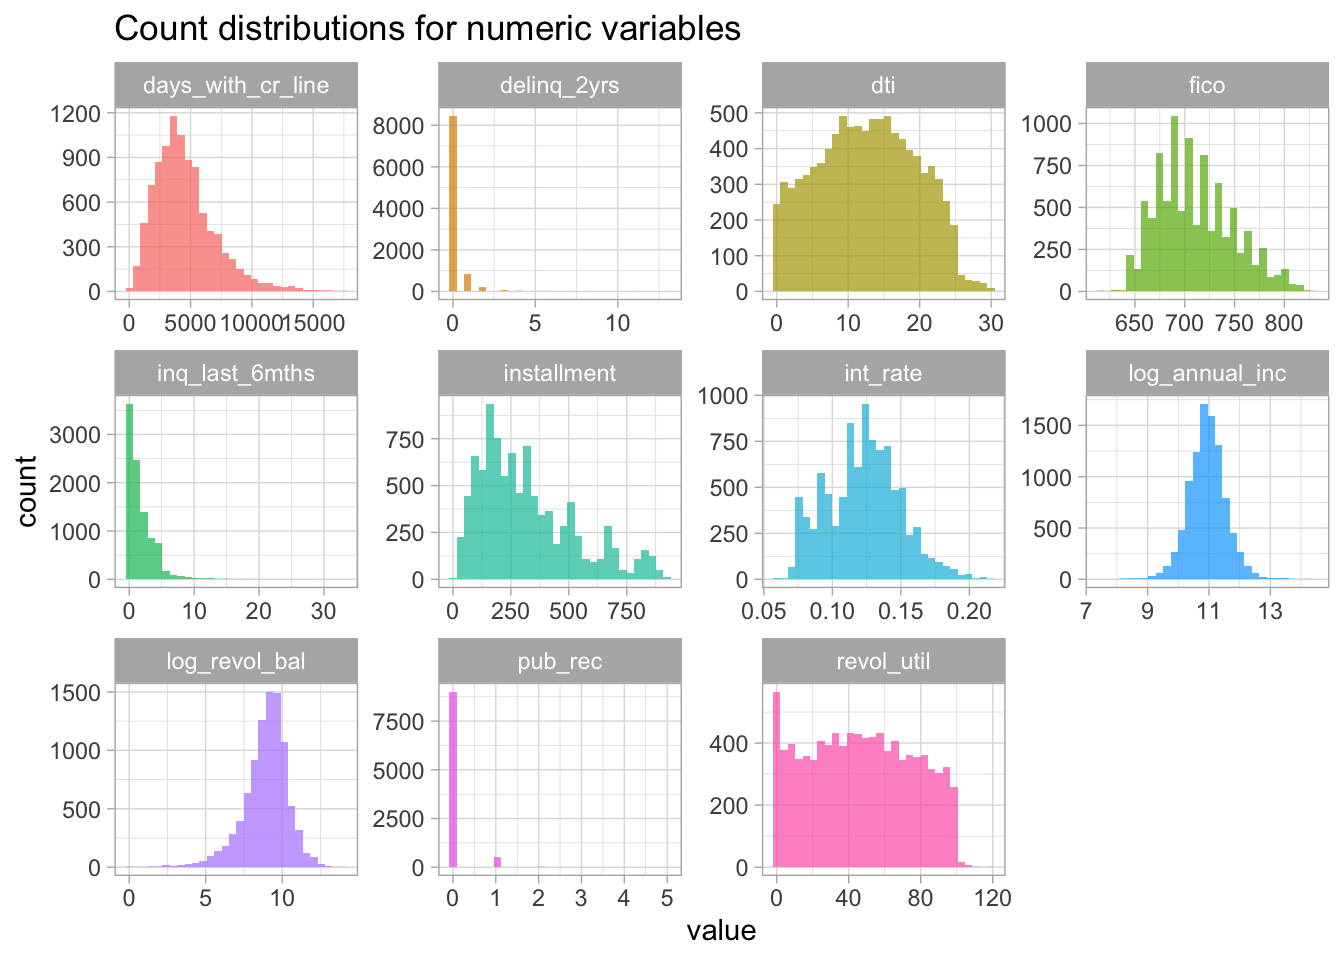 Histograms of all numeric variables